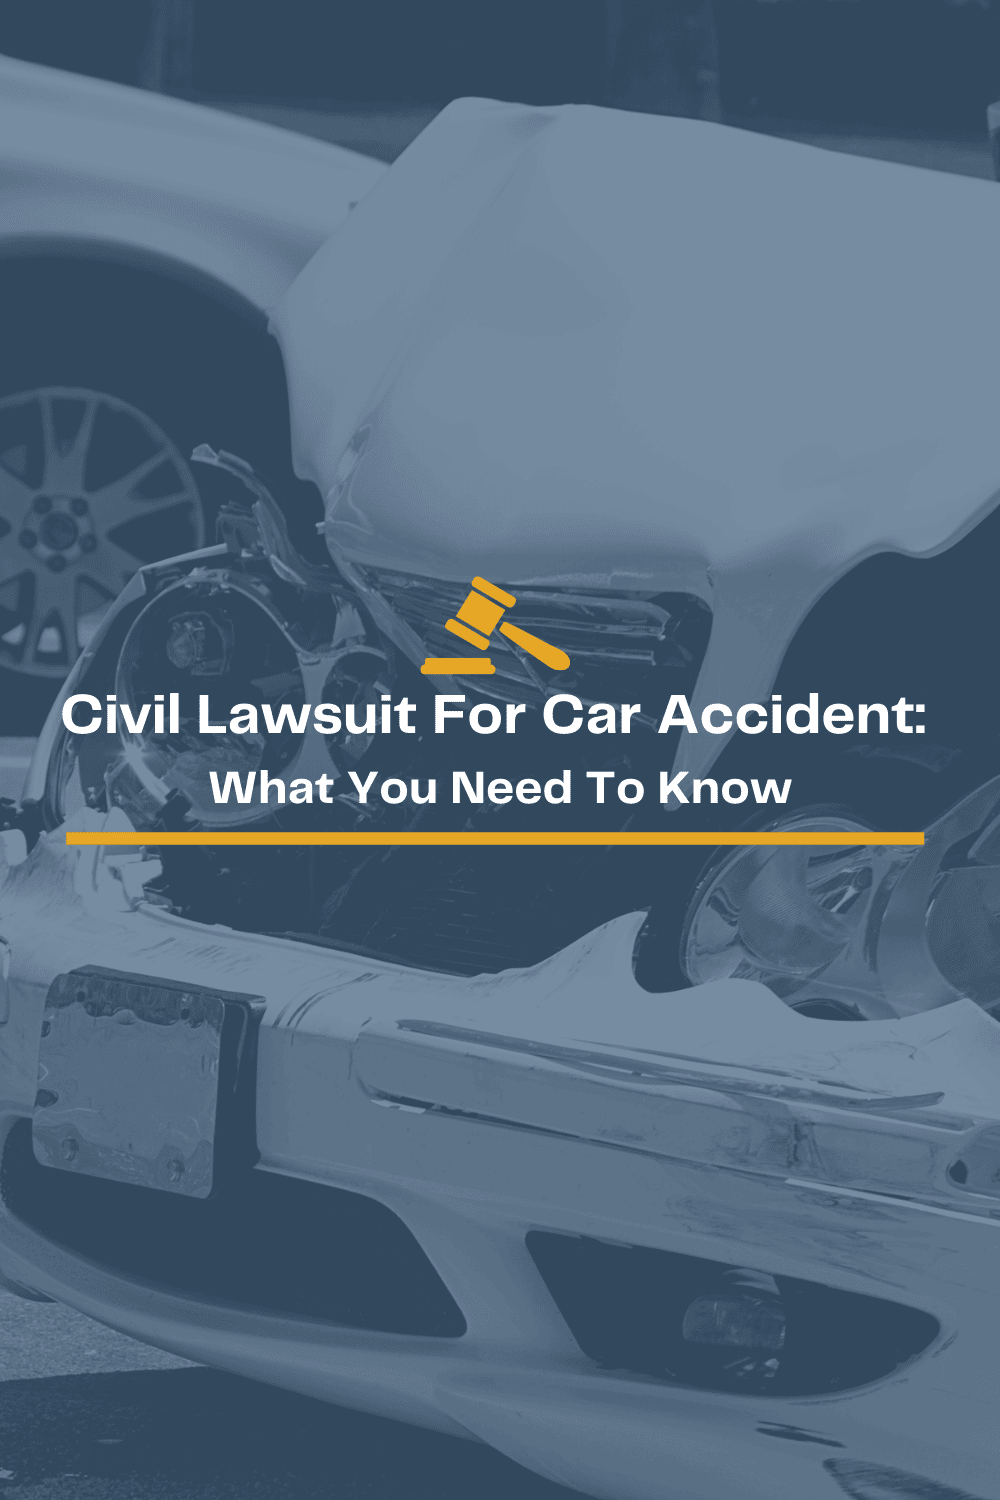 Civil Lawsuit For Car Accident: What You Need To Know